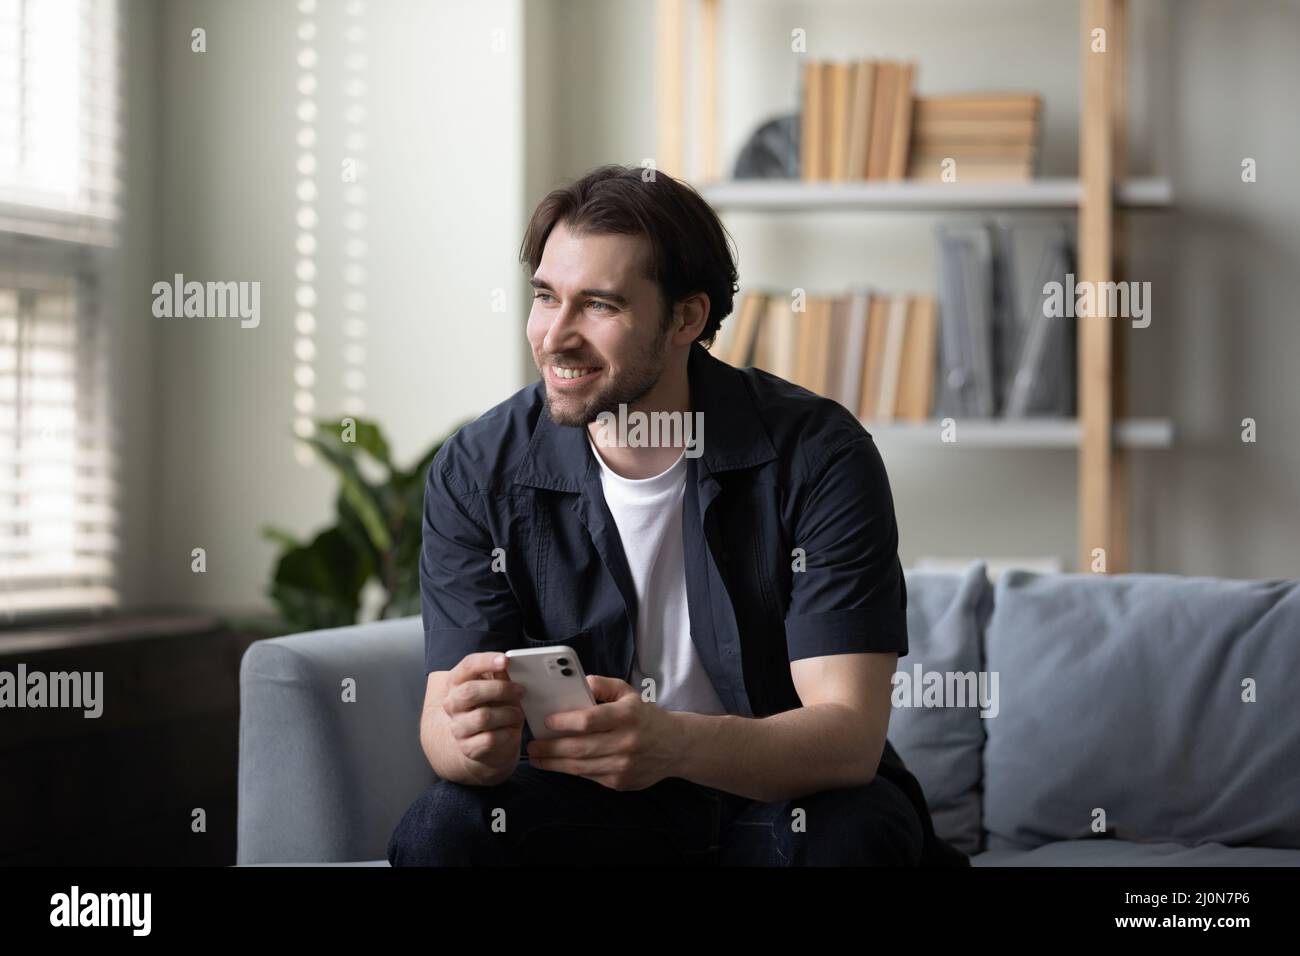 Happy cheerful cellphone user guy holding mobile phone Stock Photo